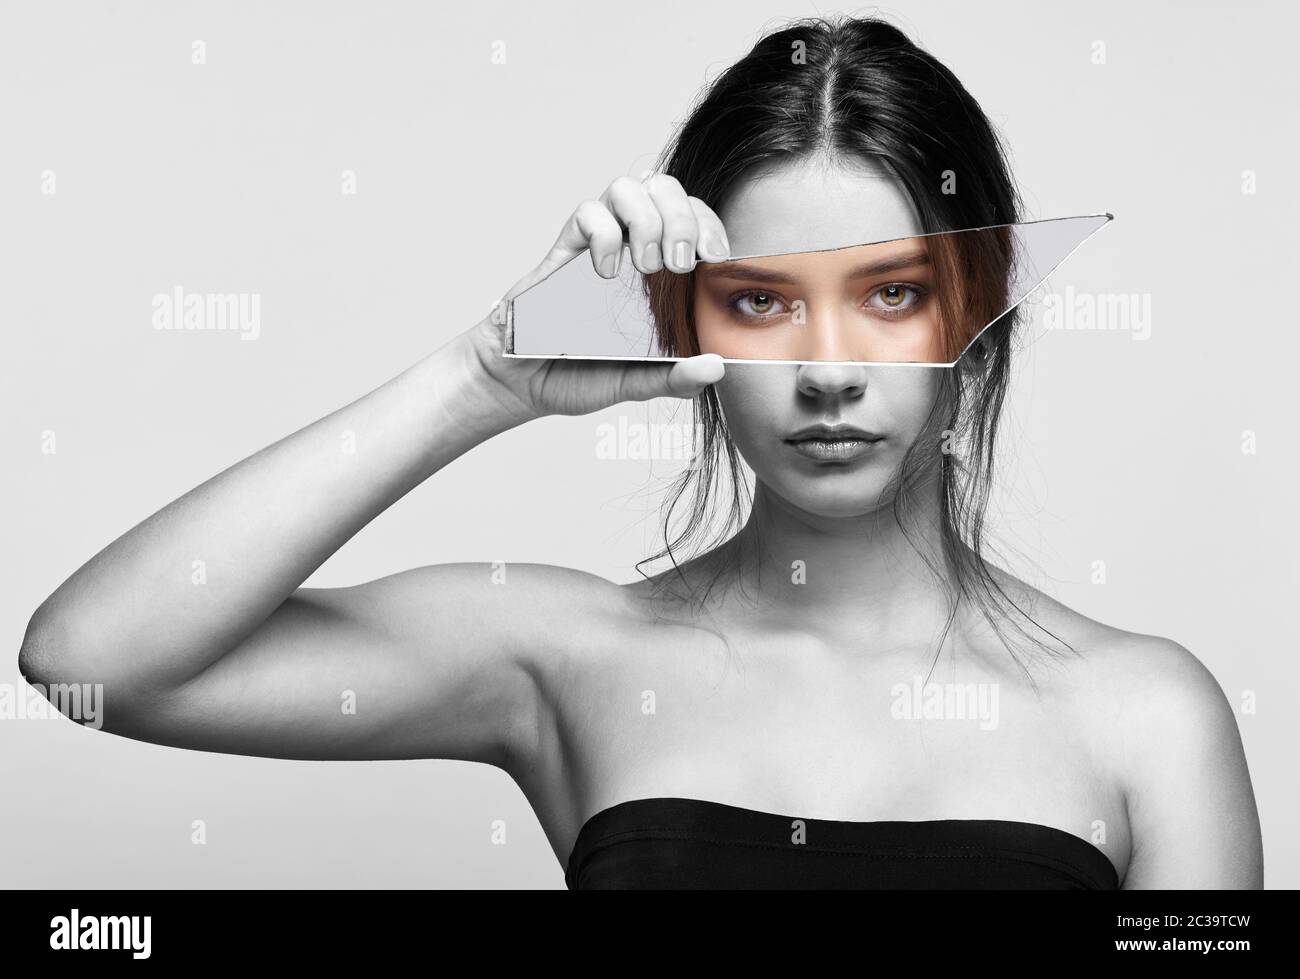 girl covers her face with a shard of the mirror female with mirror shard in hand posing on gray background 2C39TCW